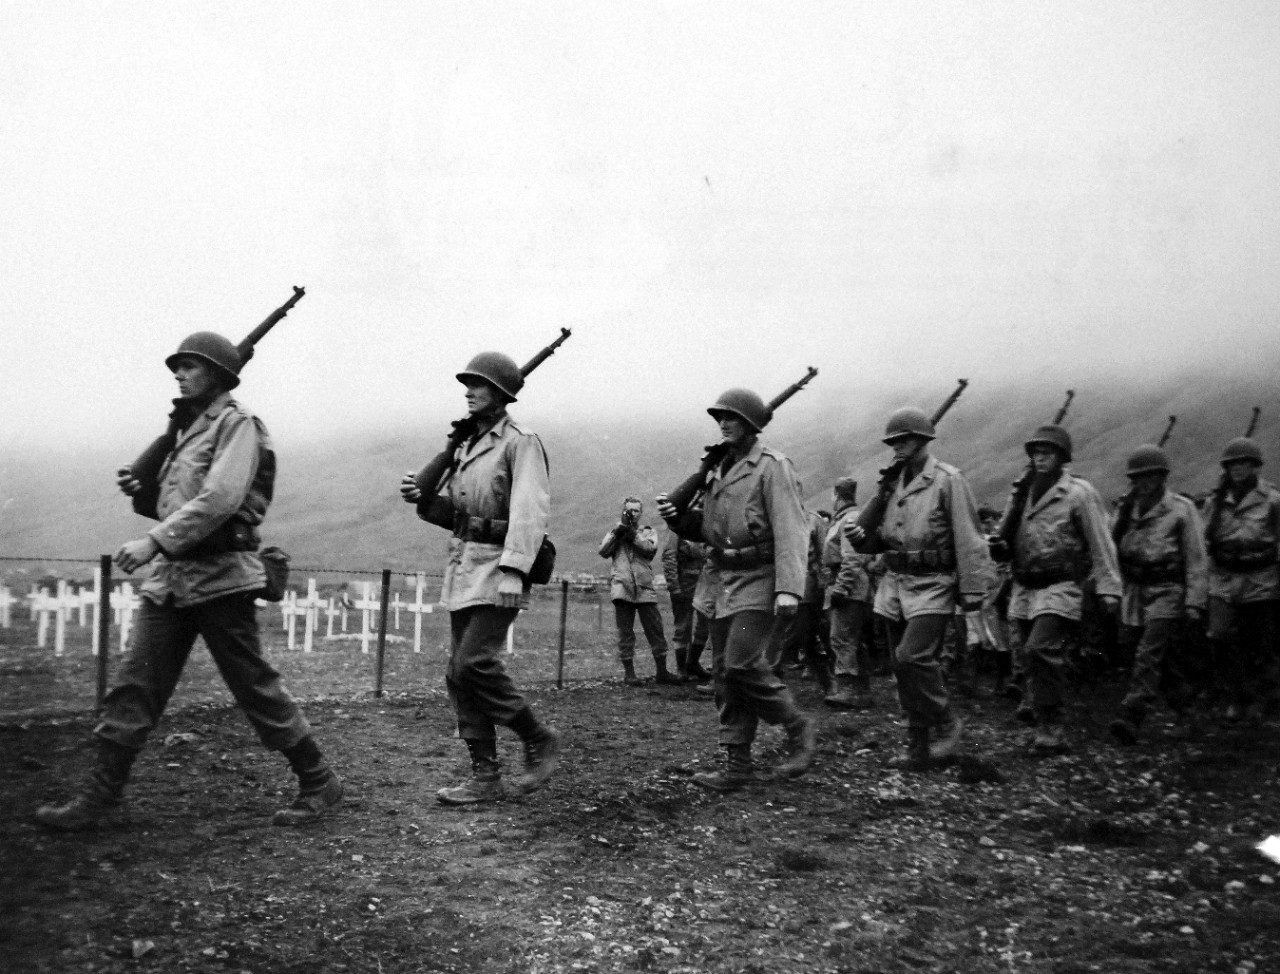 LC-Lot-803-31:  Aleutian Islands Campaign, June 1942 - August 1943.   Allied Landing on Attu Island, May 11 1943. Against the Crosses Row on Row – Marching past the white crosses of an Attu cemetery on the bleak Aleutian Island, soldiers prepare to fire a volley shot in honor of their fallen comrades – in memoriam.  In the background, the rolling fog presses downward, emphasizing the solemnity of the occasion.   U.S. Navy photograph, released September 7, 1943.   Photographed through Mylar sleeve.  Courtesy of the Library of Congress.   (2015/11/06).